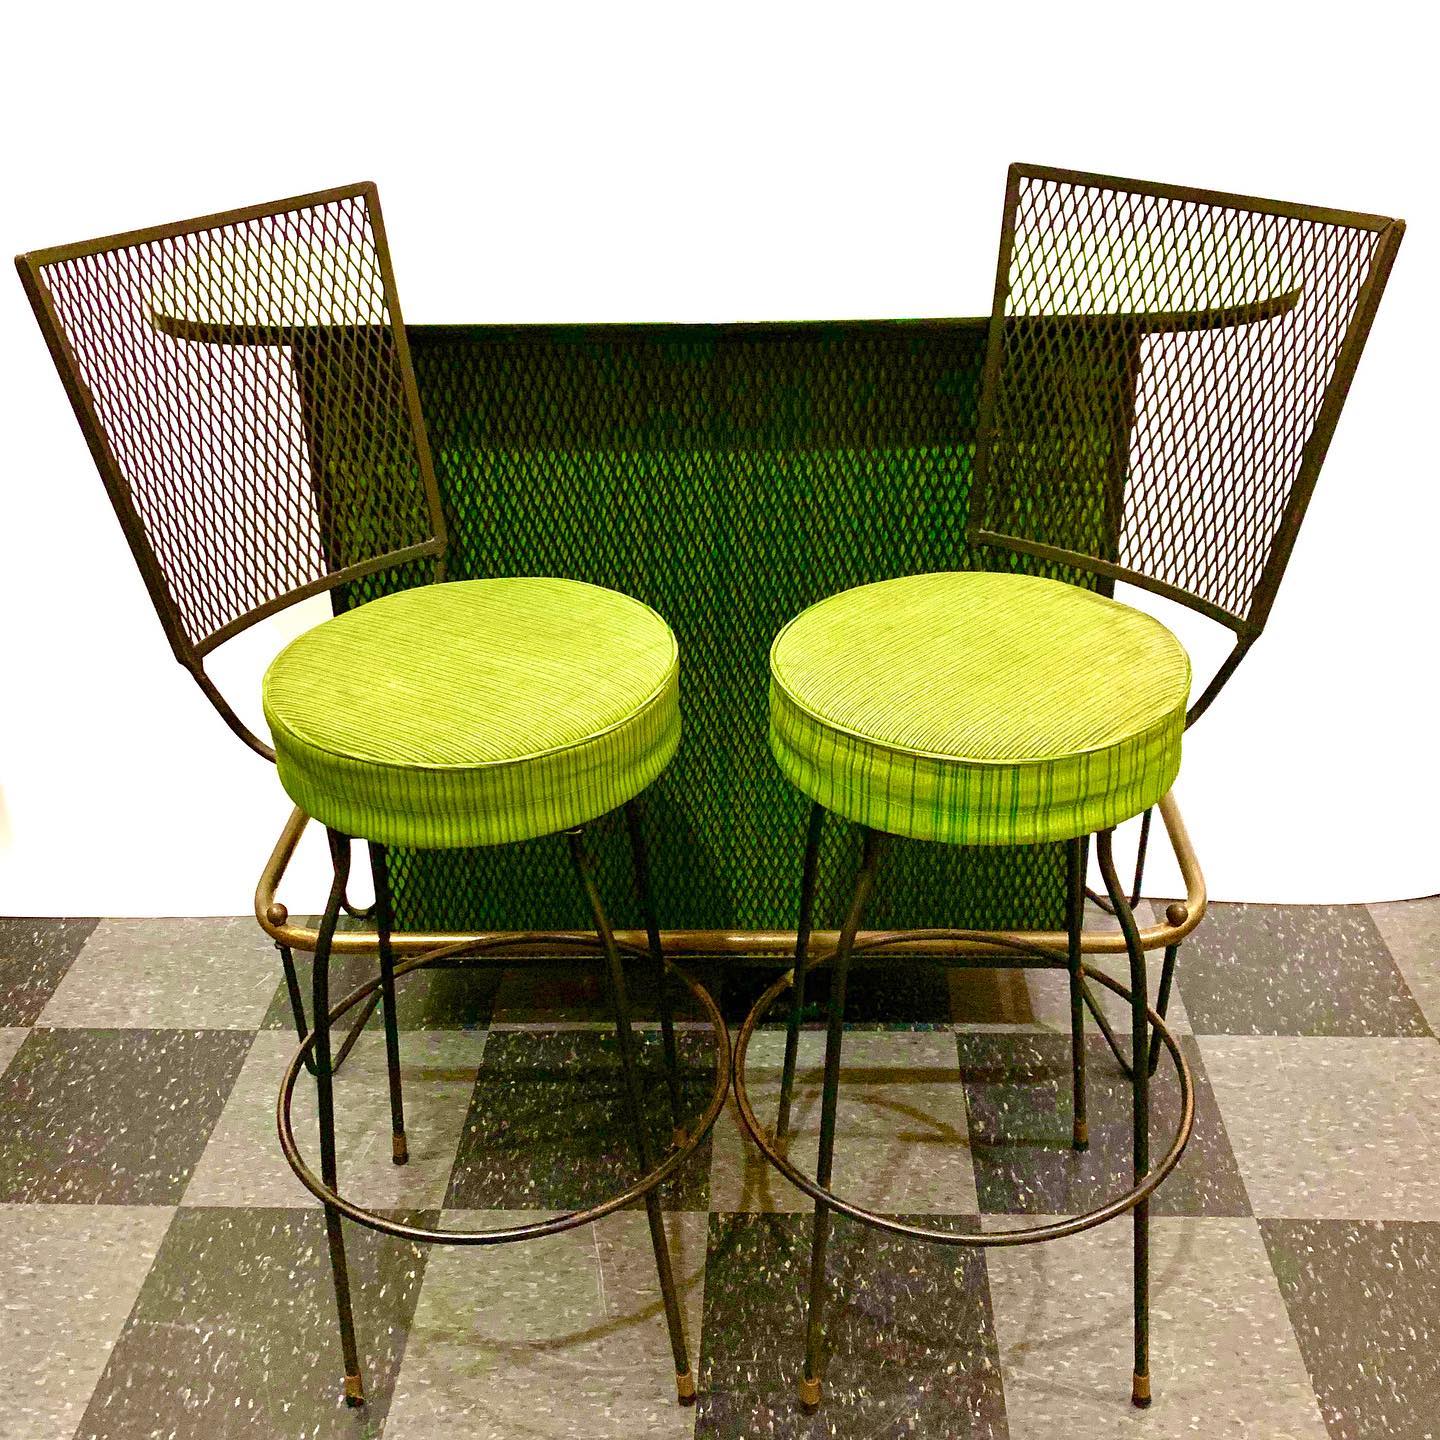 Vintage iron frame bar by Frederick Weinberg, with matching stools, textured lime green vinyl upholstery